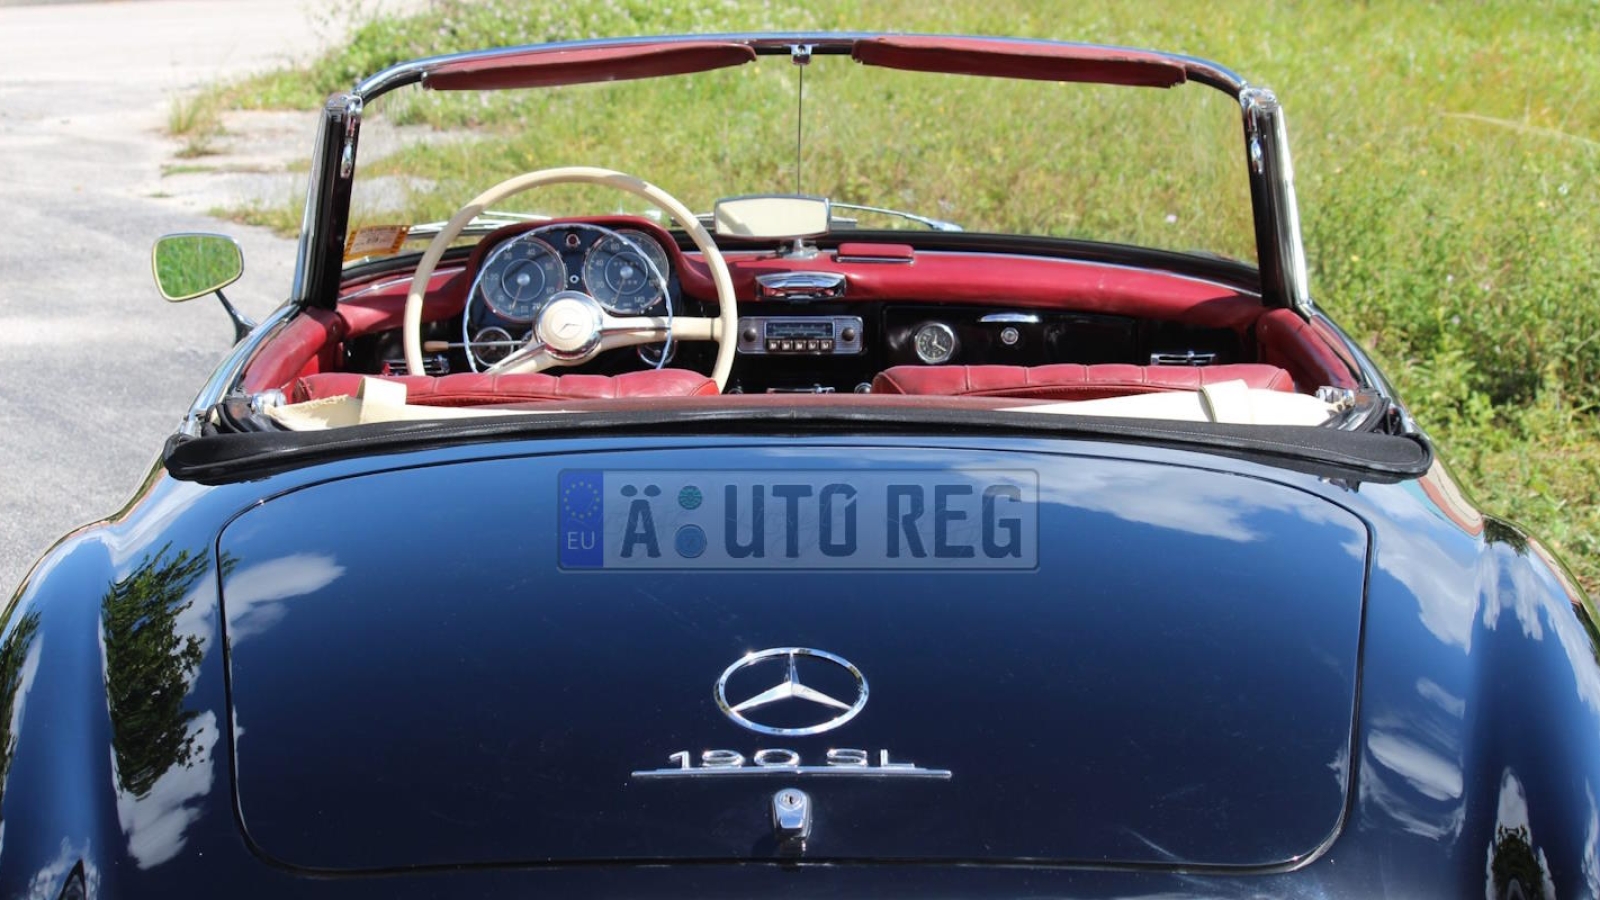 Historic licence plates for classic cars in Spain